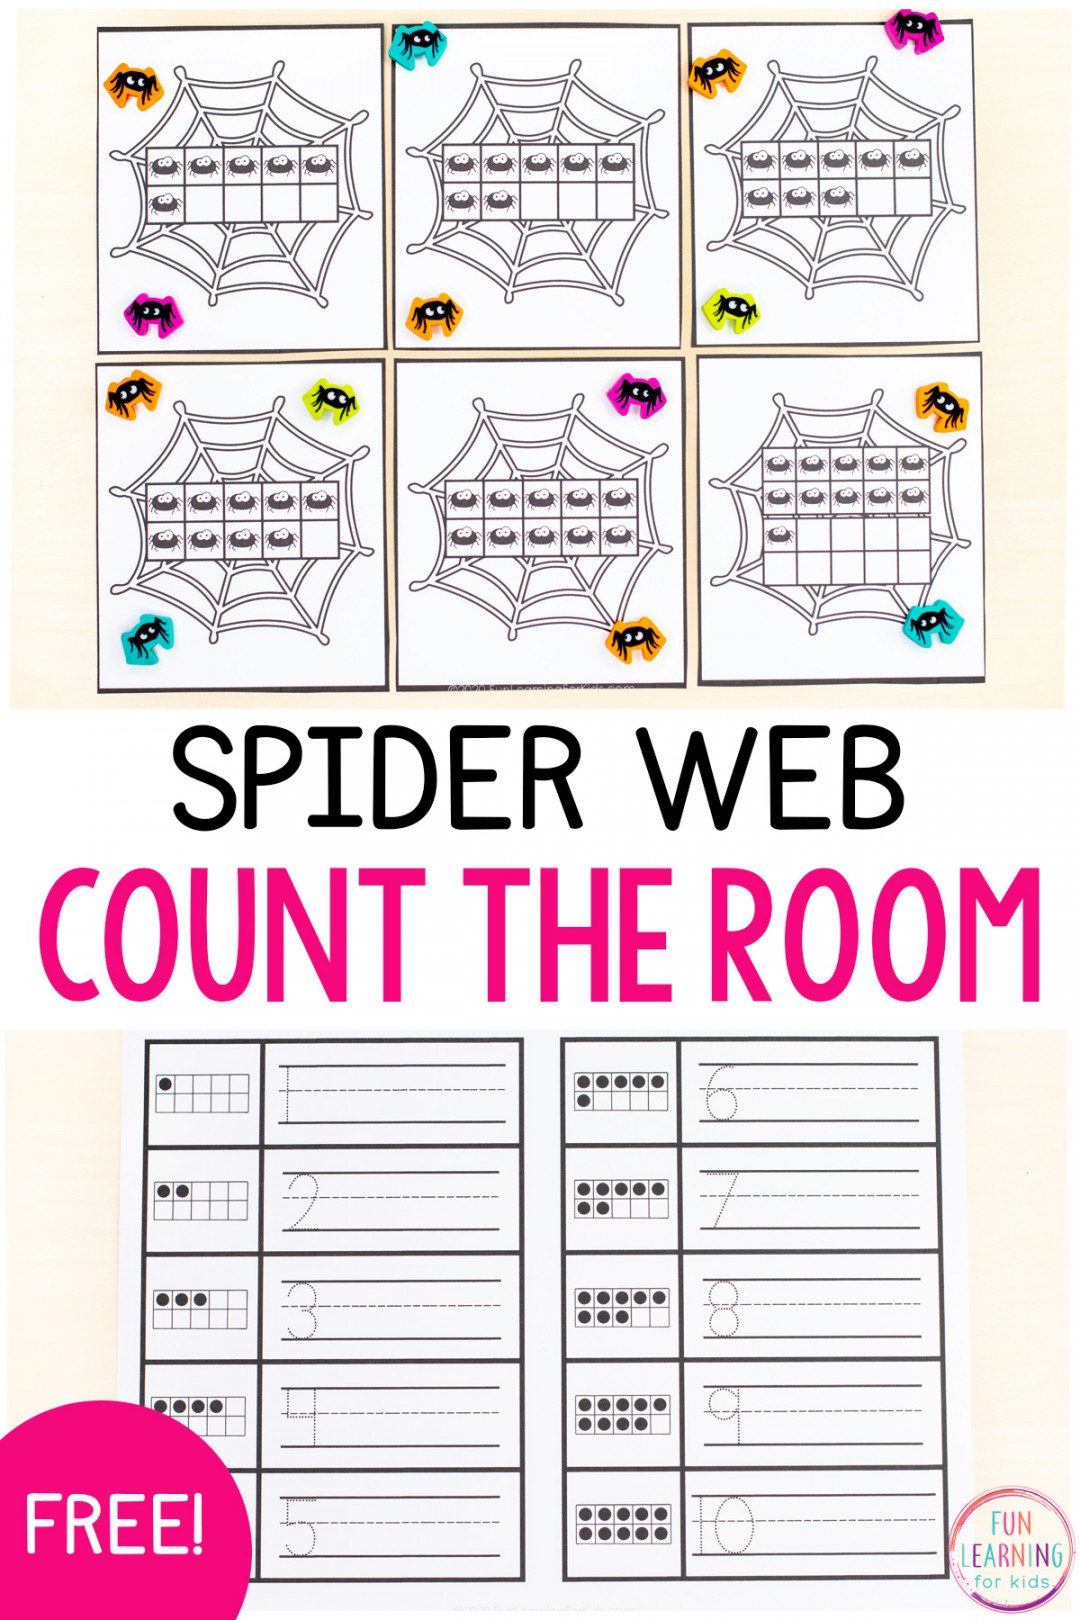 Spider Count the Room Free Printable Math Activity